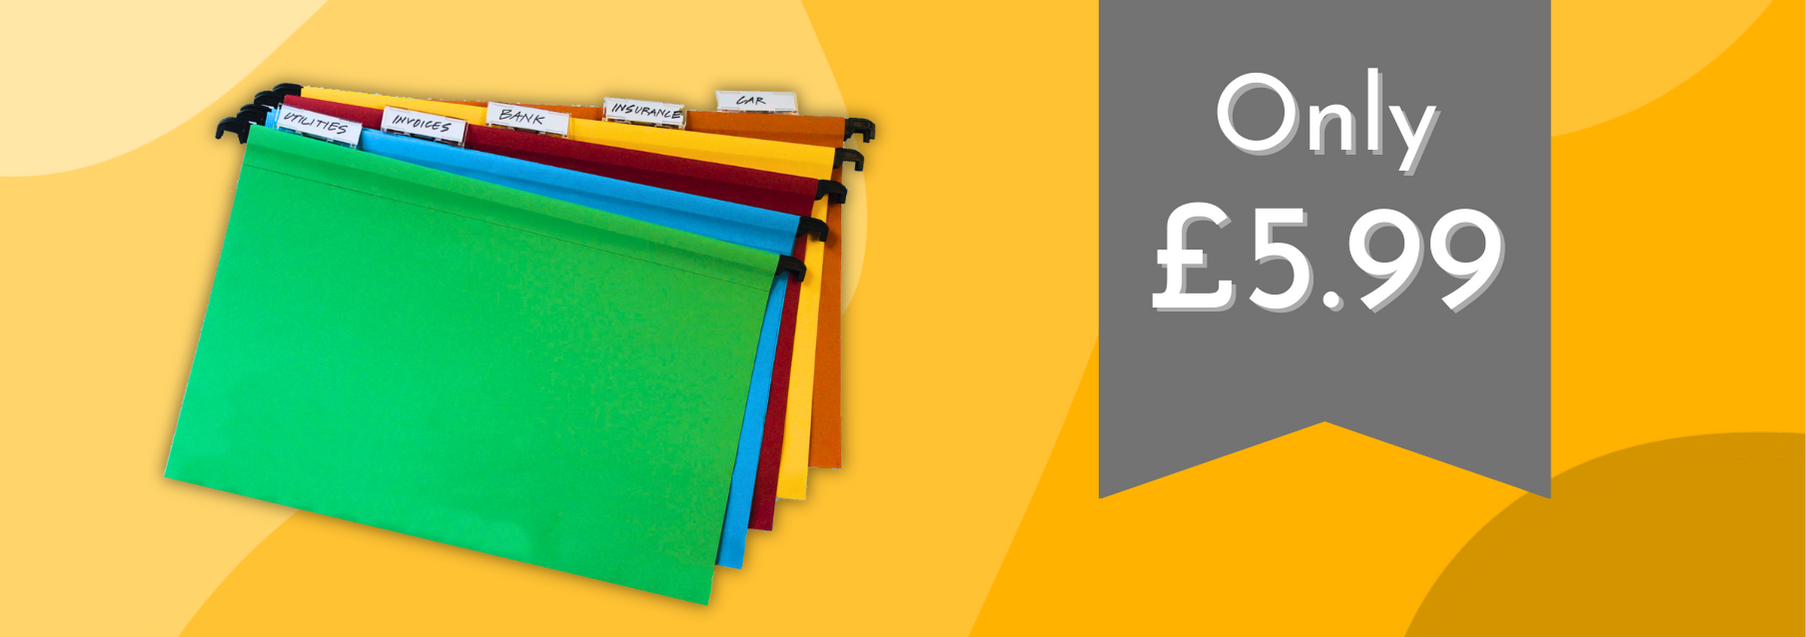 Promotional banner with an offer for a pack of 10 assorted colour suspension files, with 'Only £5.99' on a grey banner on a vibrant yellow background.